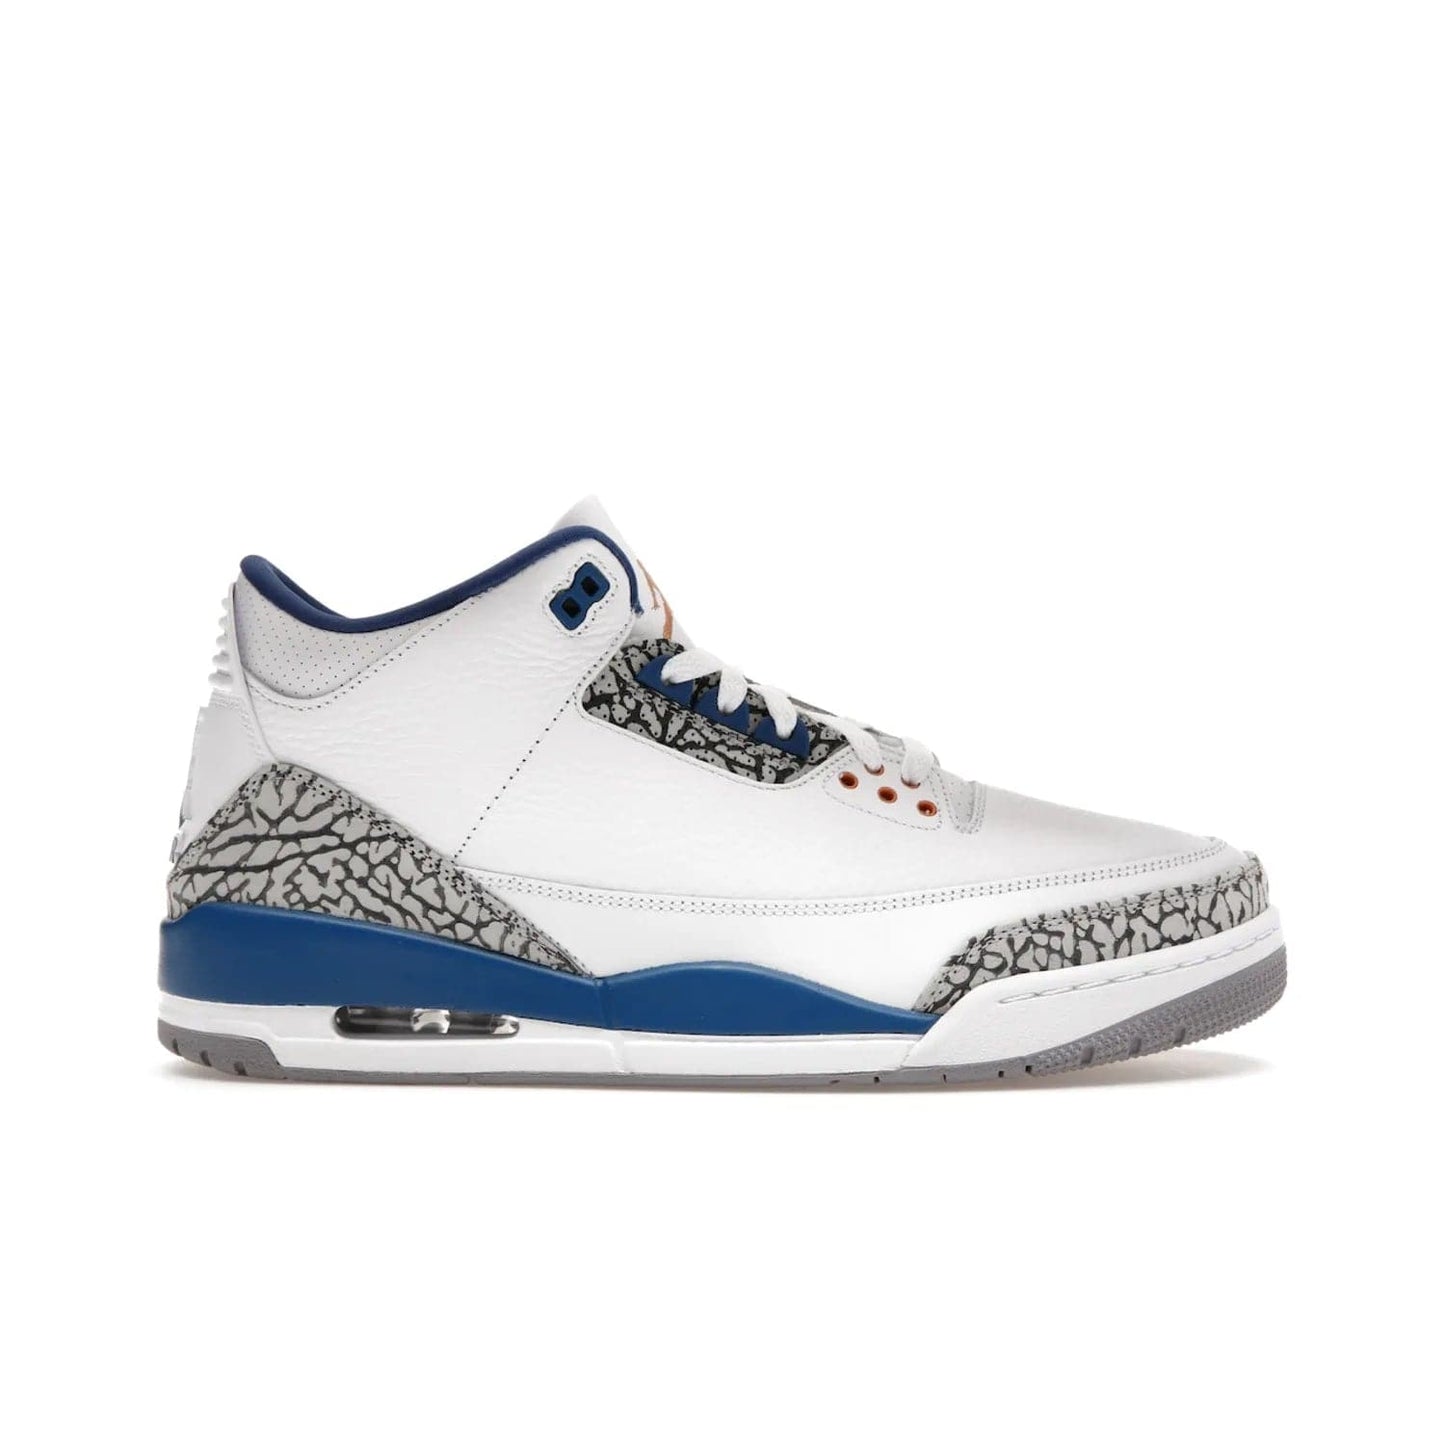 Jordan 3 Retro Wizards - Image 1 - Only at www.BallersClubKickz.com - ##
Special tribute sneaker from Jordan Brand to Michael Jordan's time with the Washington Wizards. Iconic white upper, orange Jumpman logo, blue accents, metallic copper details, and cement grey outsole. Buy the Air Jordan 3 Retro Wizards April 29, 2023.